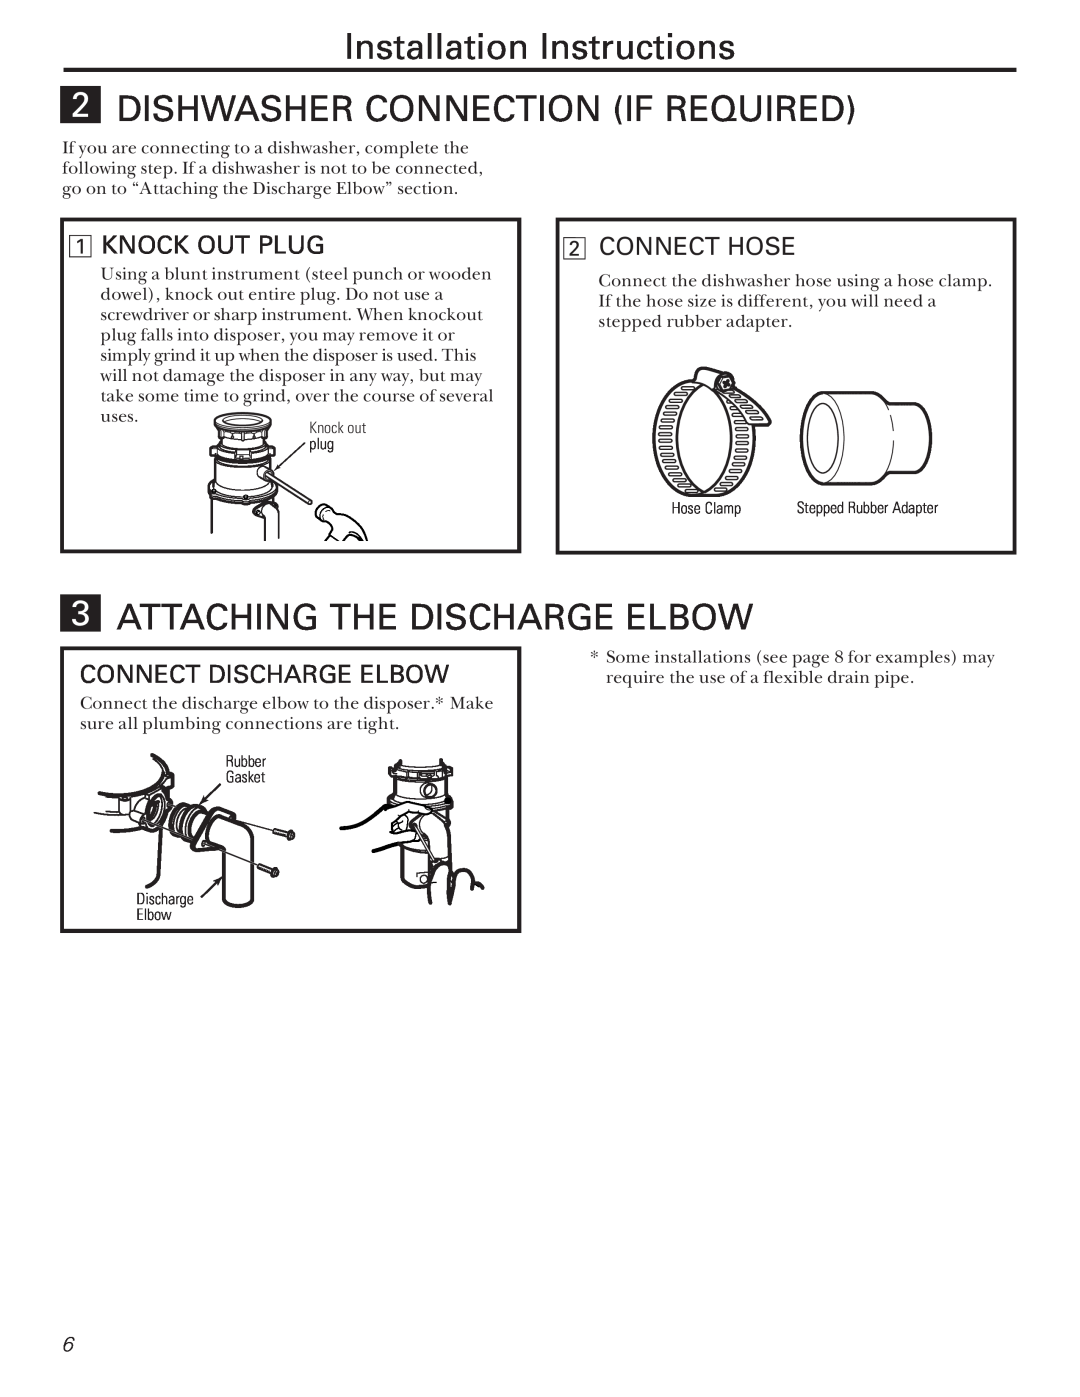 Camco GFB762F Installation Instructions 2 DISHWASHER CONNECTION IF REQUIRED, Attaching The Discharge Elbow, Knock Out Plug 